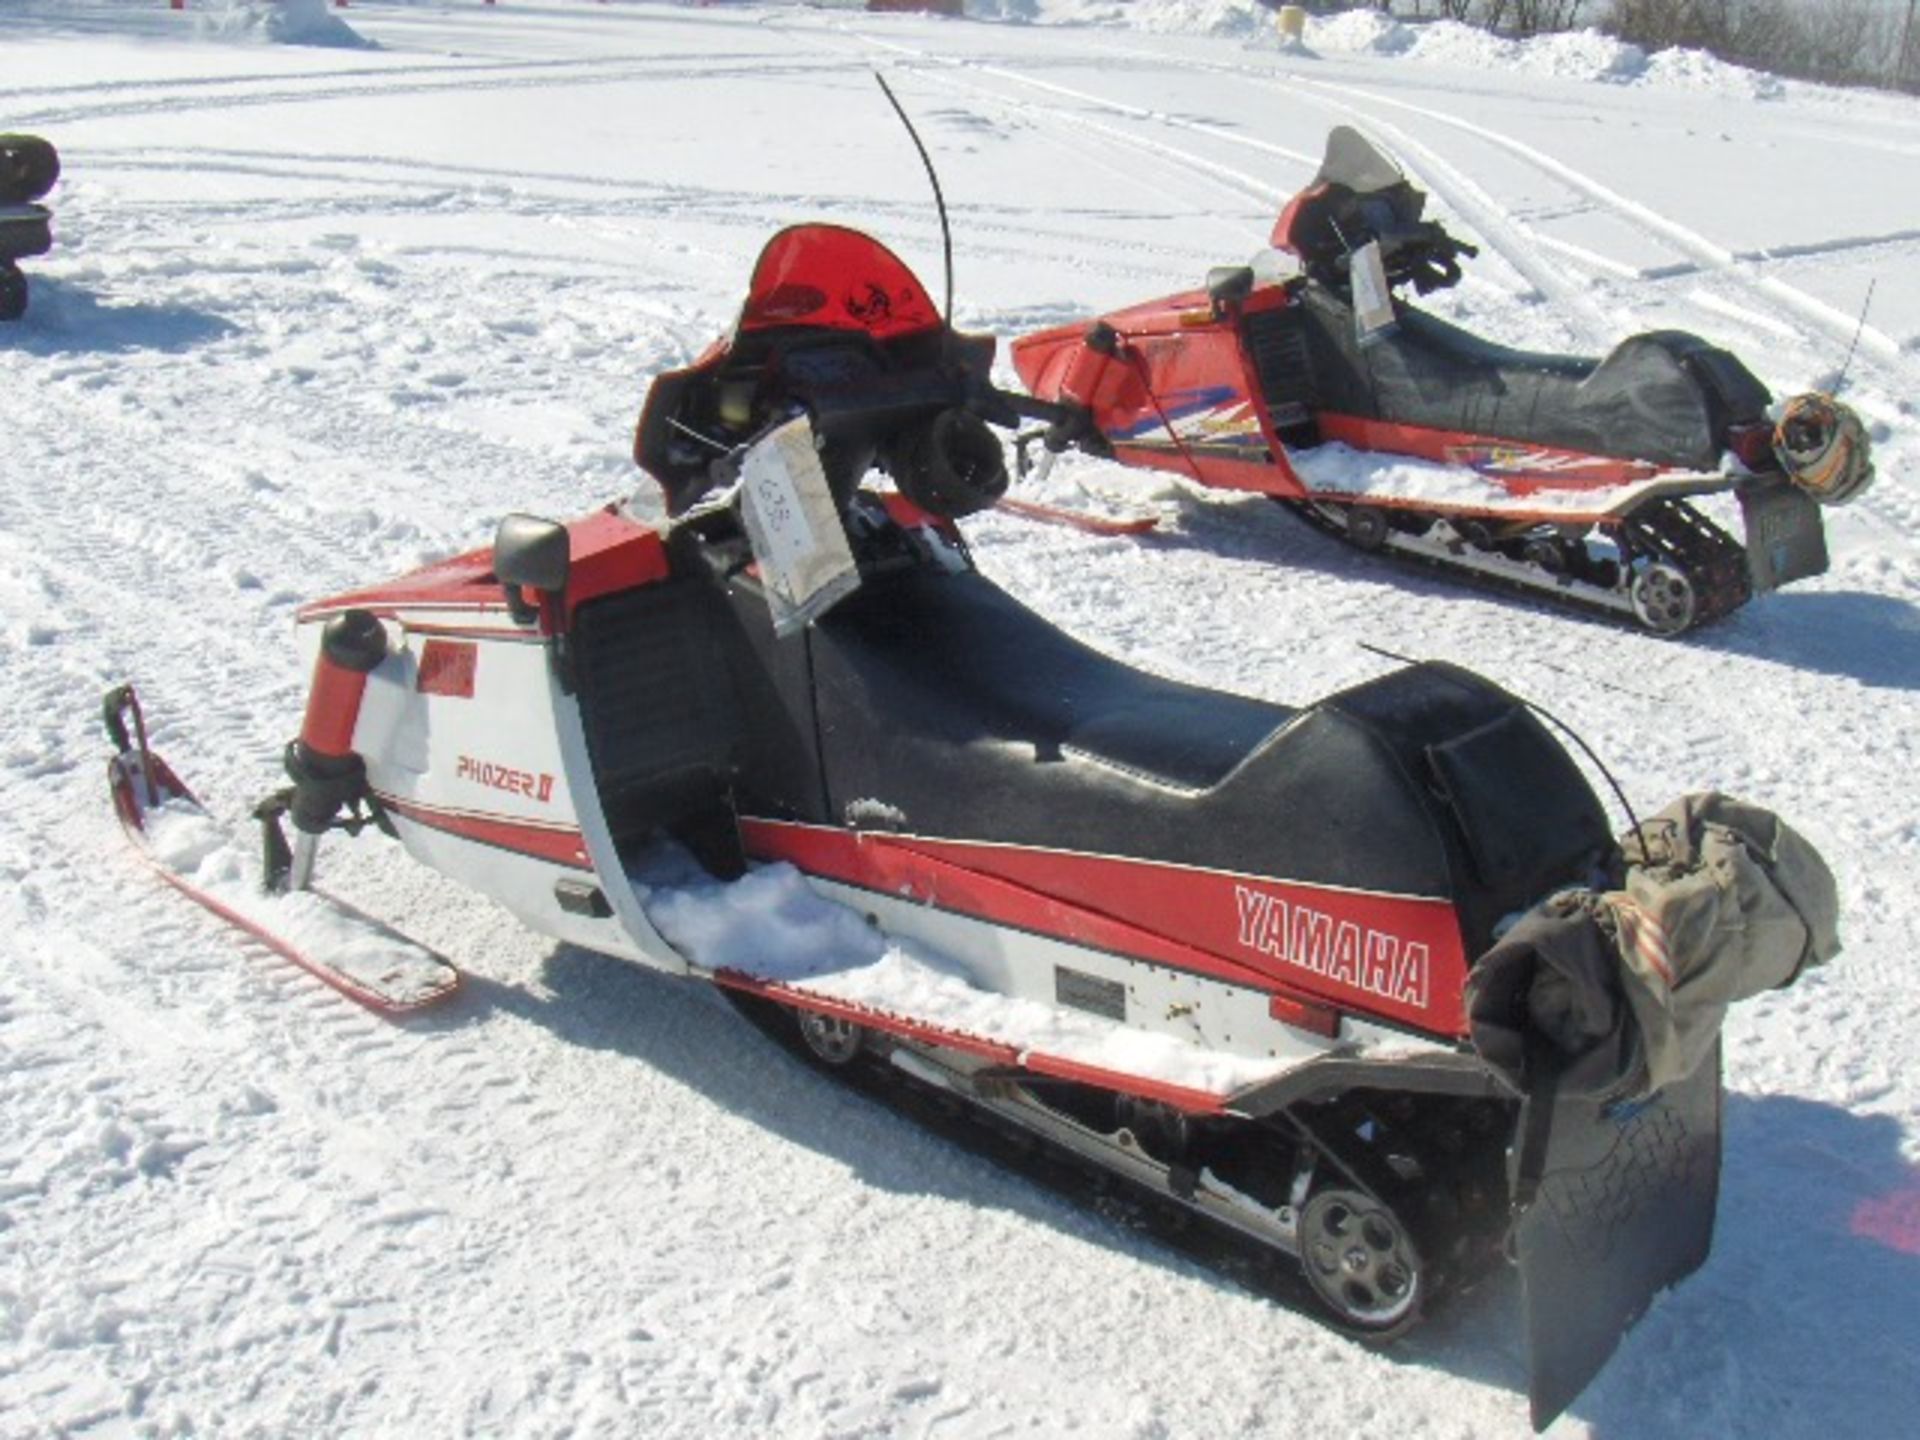 1990 YAMAHA 480 PHAZER II  87F002651 snowmobile, owner started at time of auction check in, 2 - Image 3 of 3